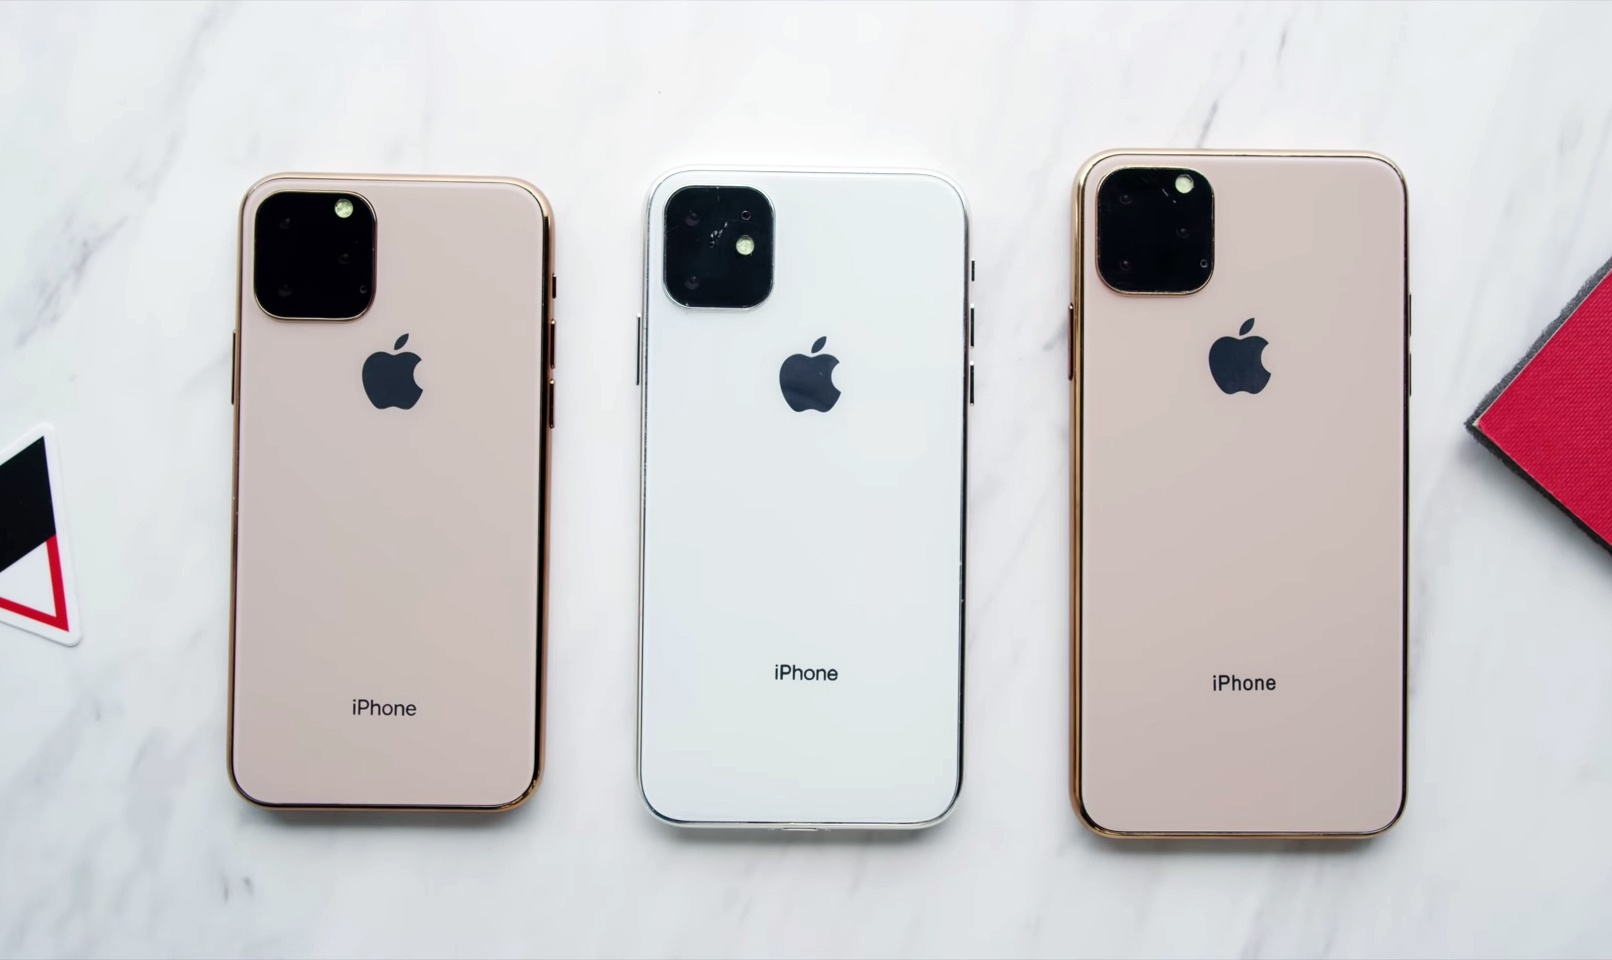 iphone 11 mkbhd